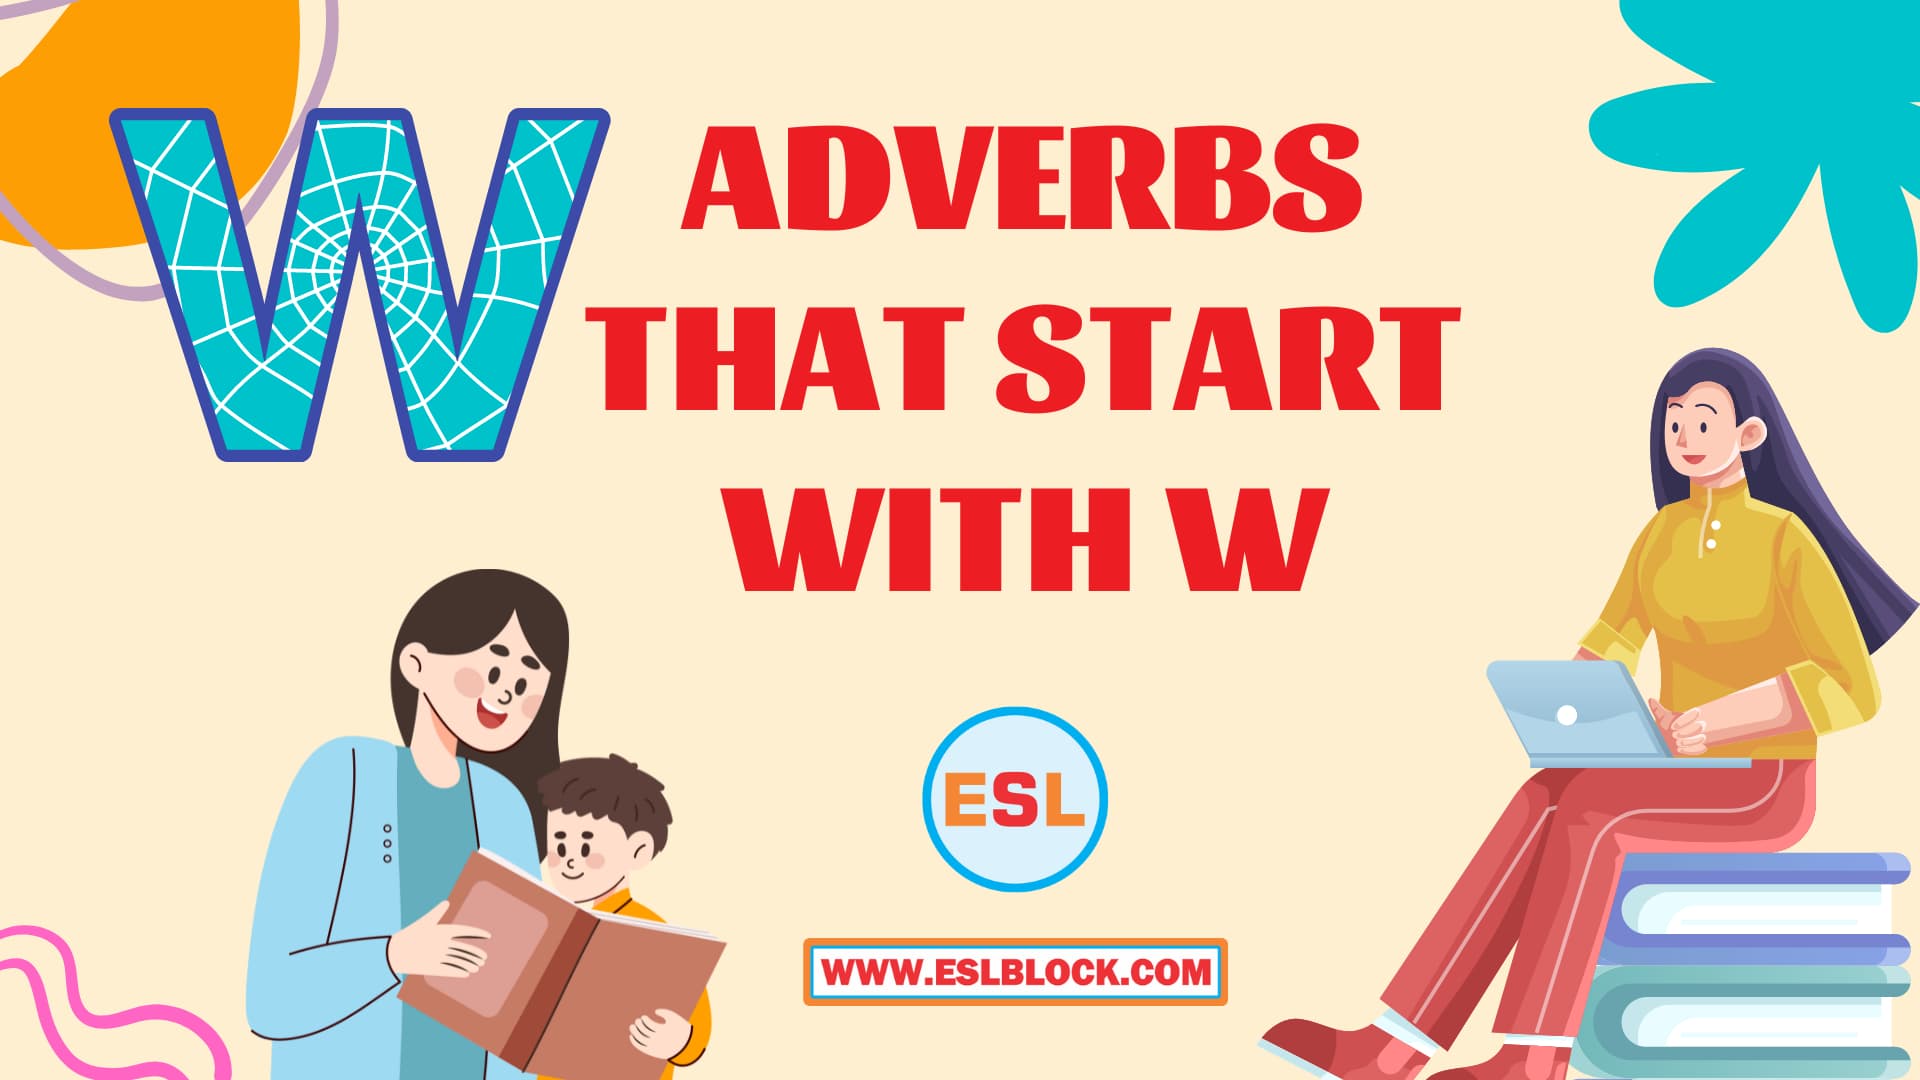 100 Example Sentences Using Adverbs, 4 Letter Adverbs That Start with W, 4 Letter Words, 5 Letter Adverbs That Start with W, 5 Letter Words, 6 Letter Adverbs That Start with W, 6 Letter Words, A to Z Adverbs, AA Adverbs, Adverb vocabulary words, Adverbs, Adverbs That Start with W, Adverbs with Example Sentences, All Adverbs, Types of Adverbs, Types of Adverbs with Example Sentences, Vocabulary, What are Adverbs, What are the types of Adverbs, Words That with W